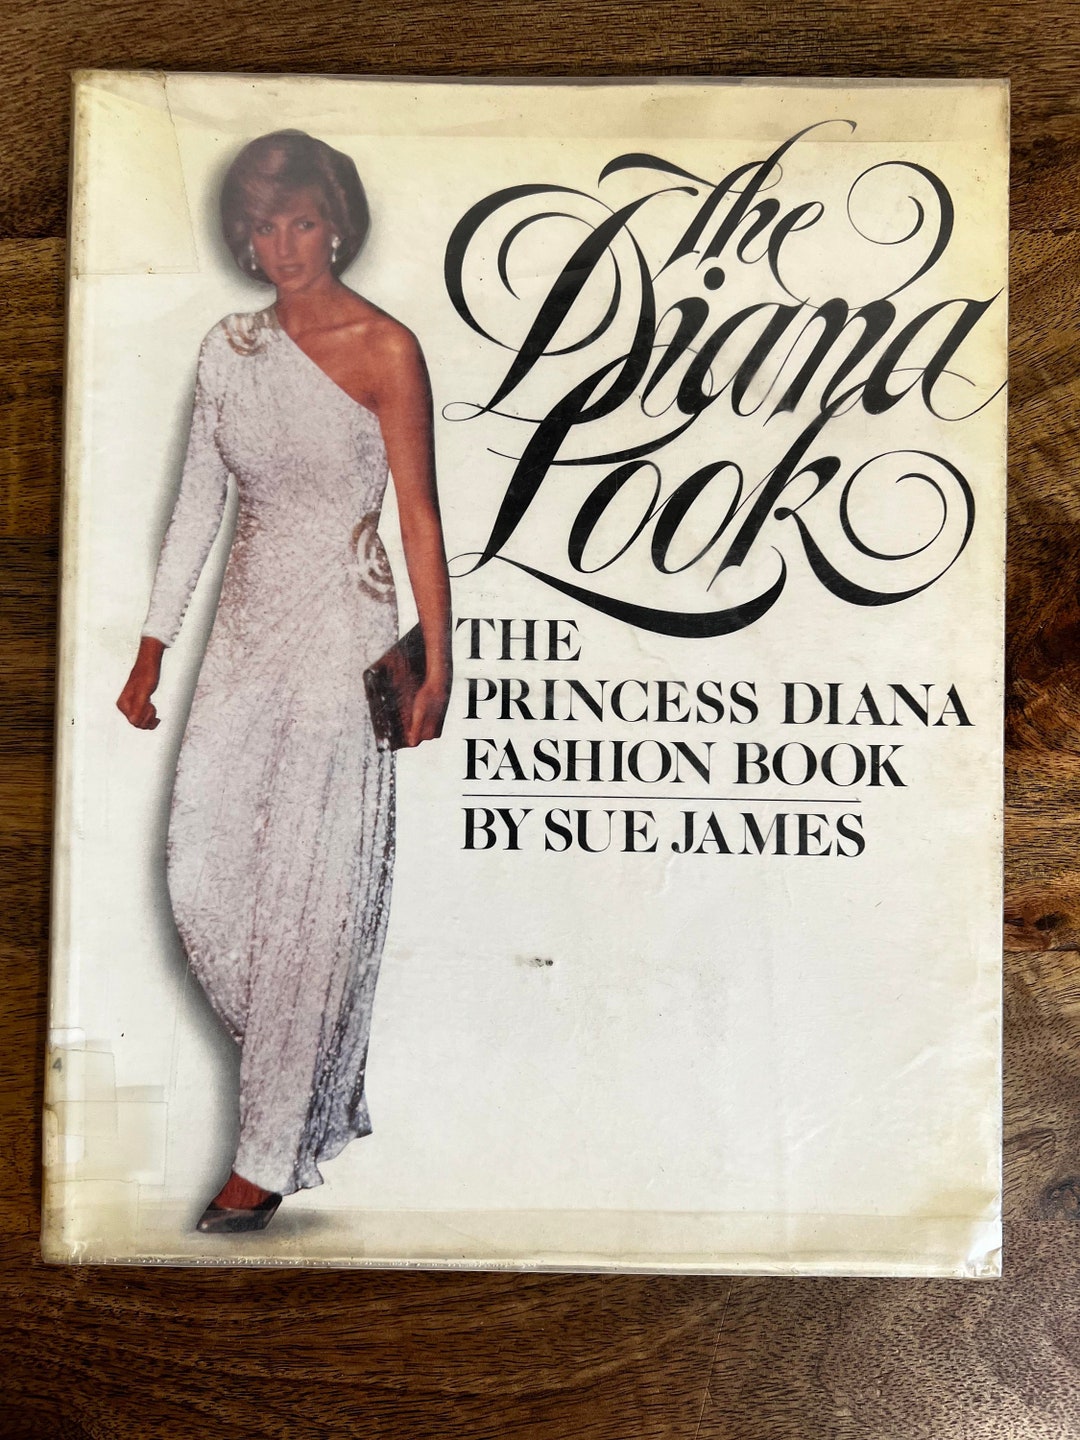 The Diana Look the Princess Diana Fashion Book by Sue James - Etsy